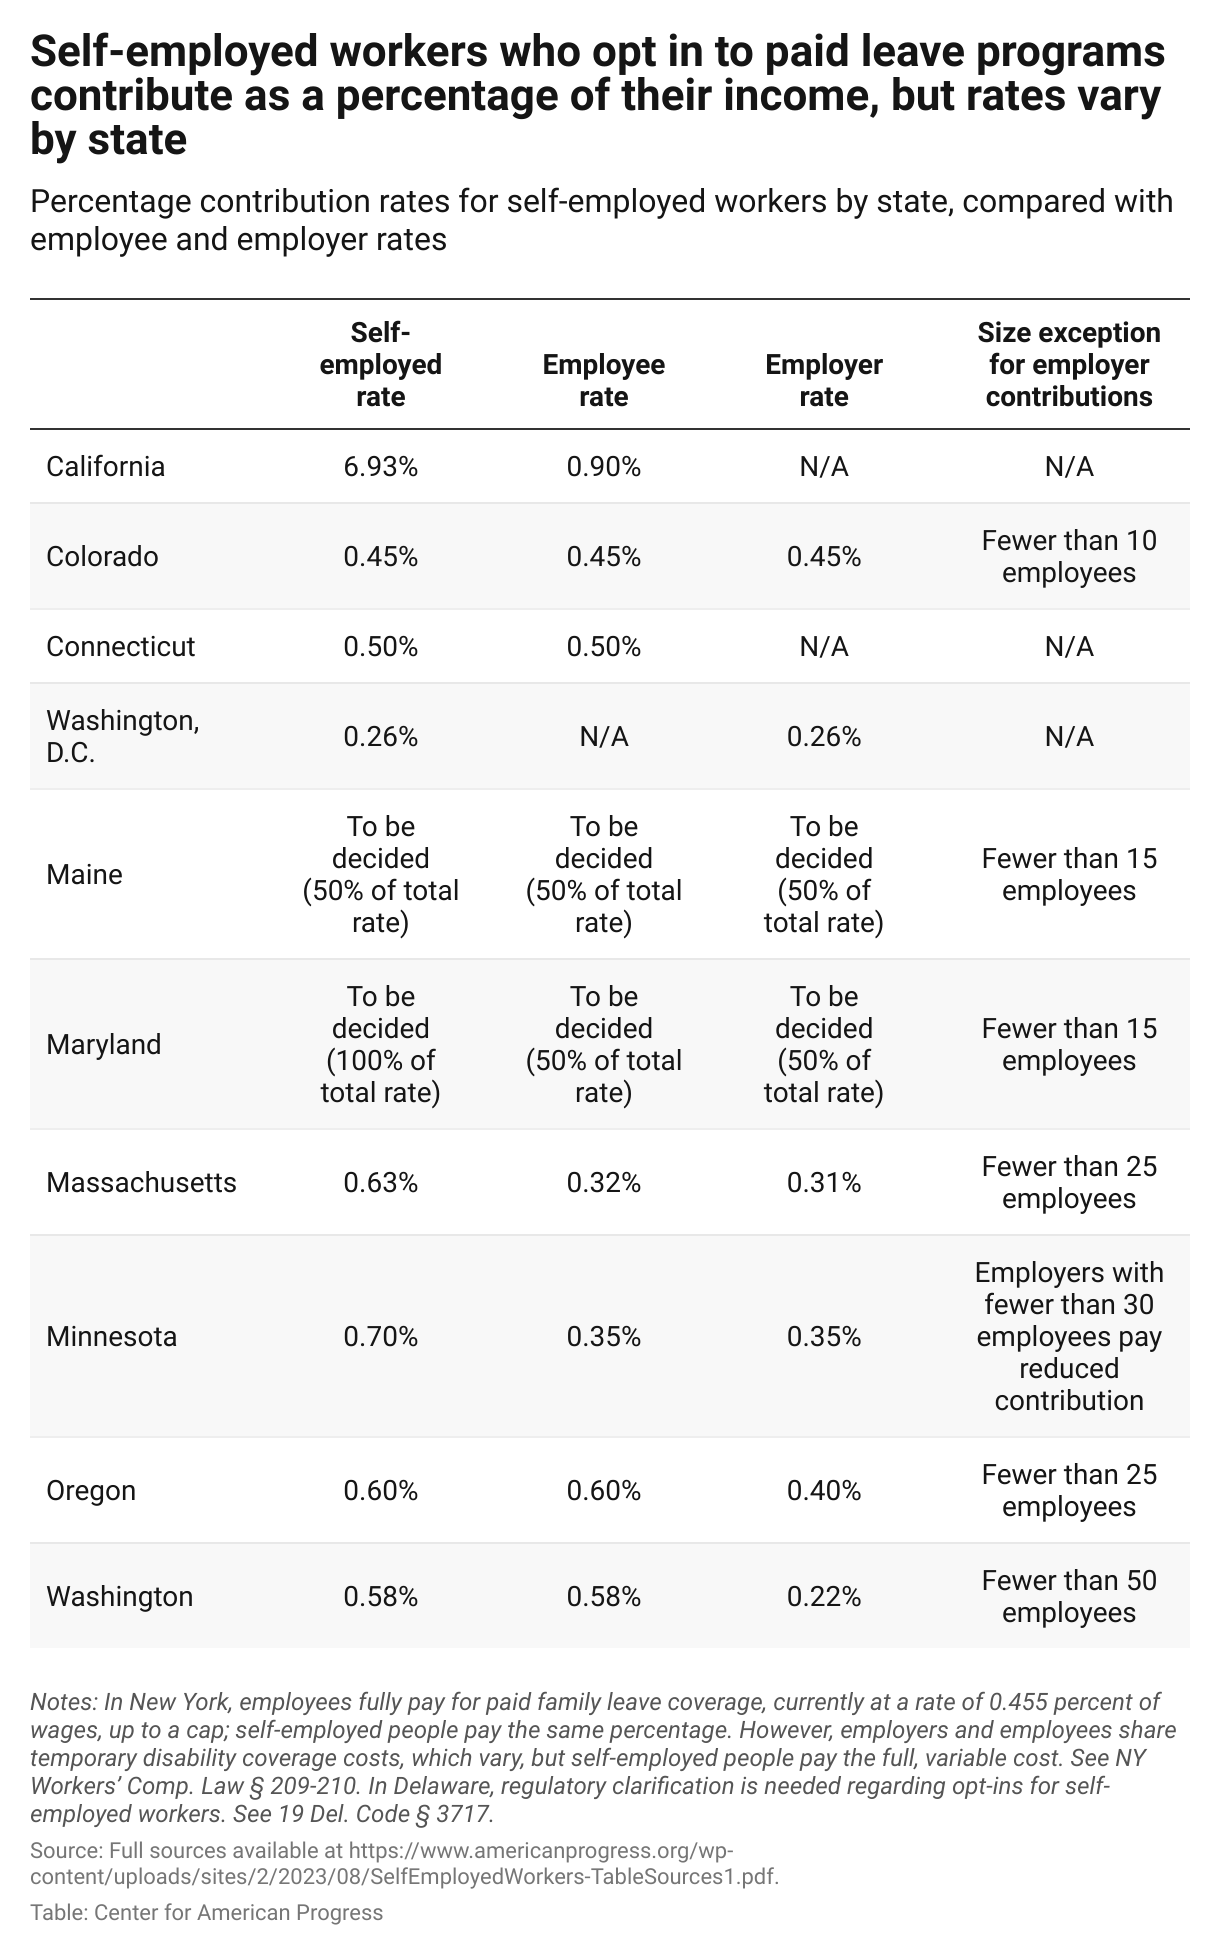 Table showing the percentages that self-employed workers pay of their incomes if they opt in to state paid leave programs, compared with employers and employees, as well as exceptions based on employer size.